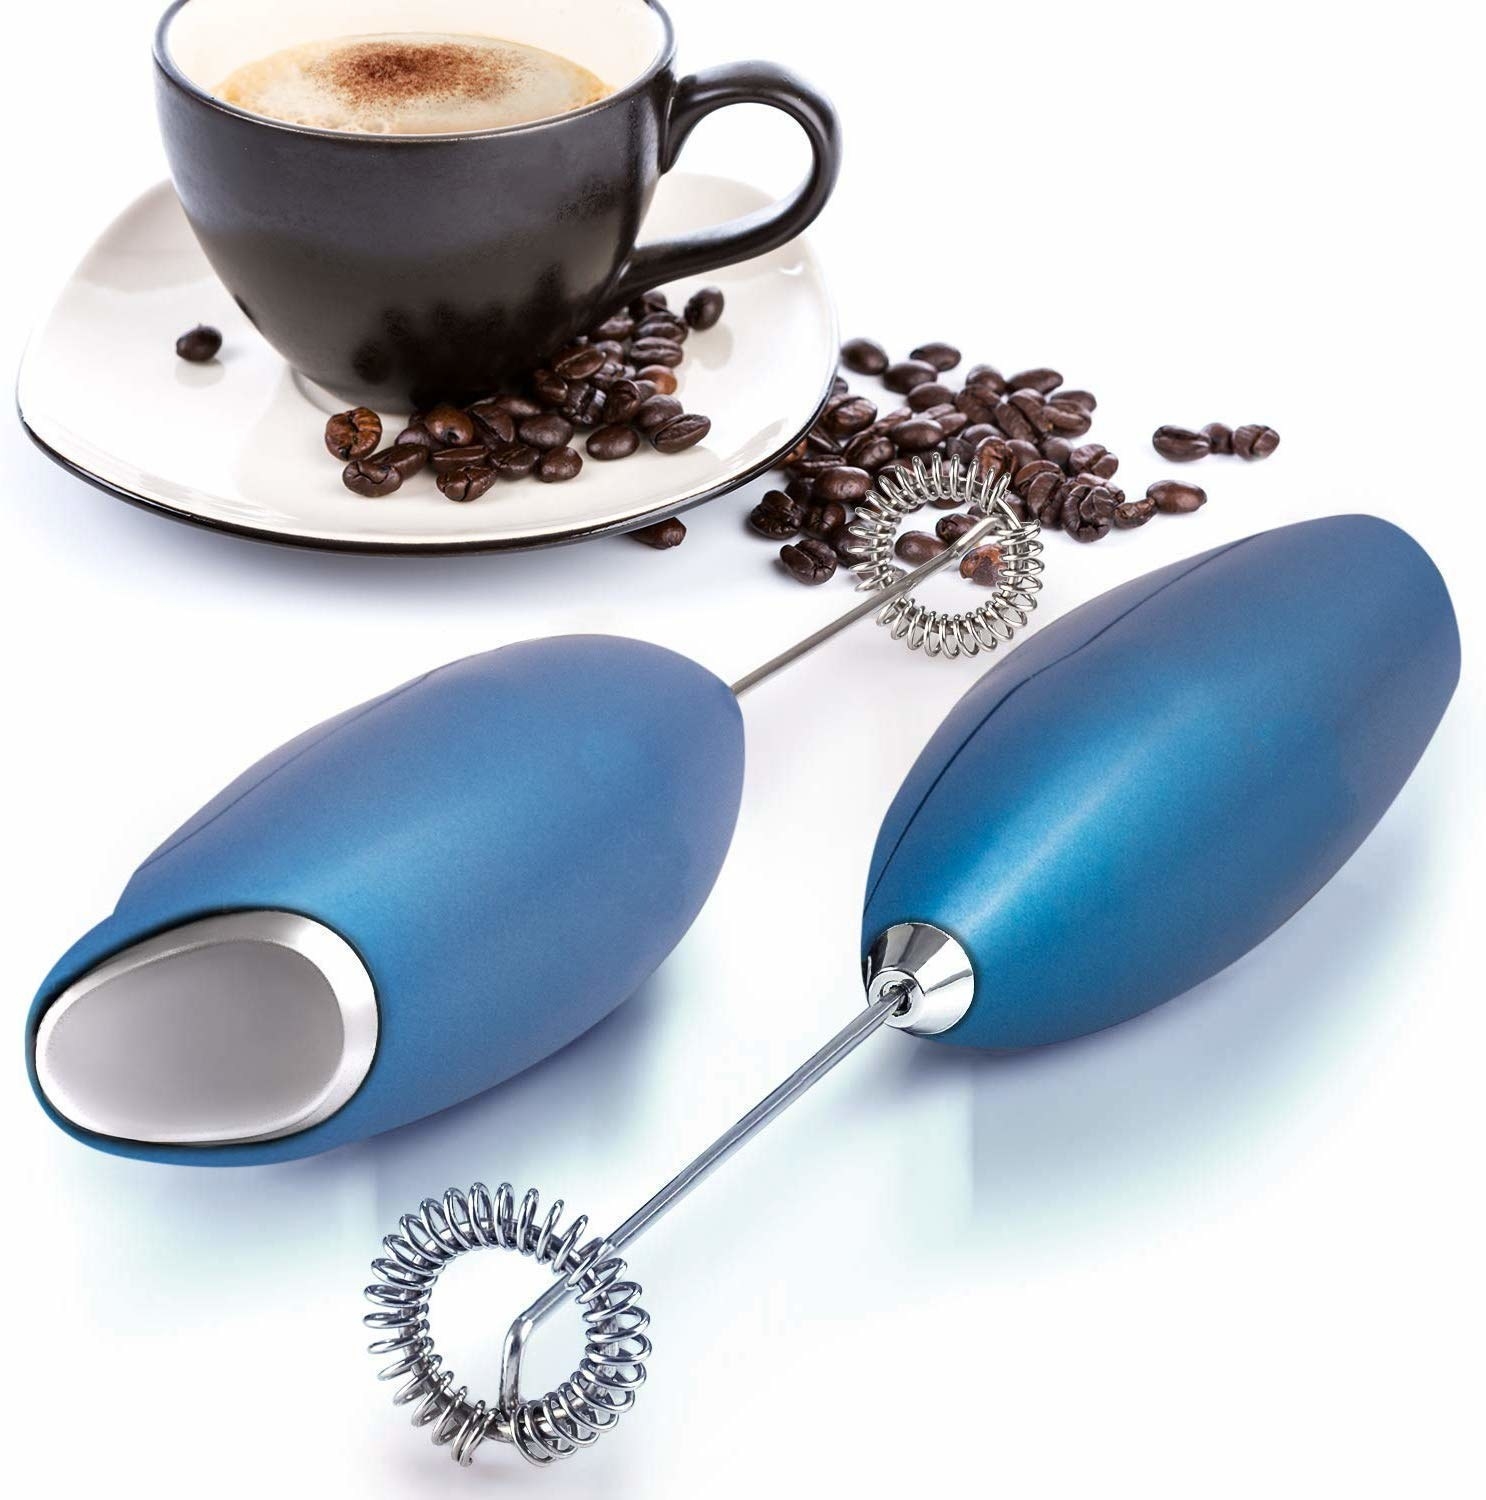 Two hand blenders lying next to a foamy cup of coffee and some coffee beans